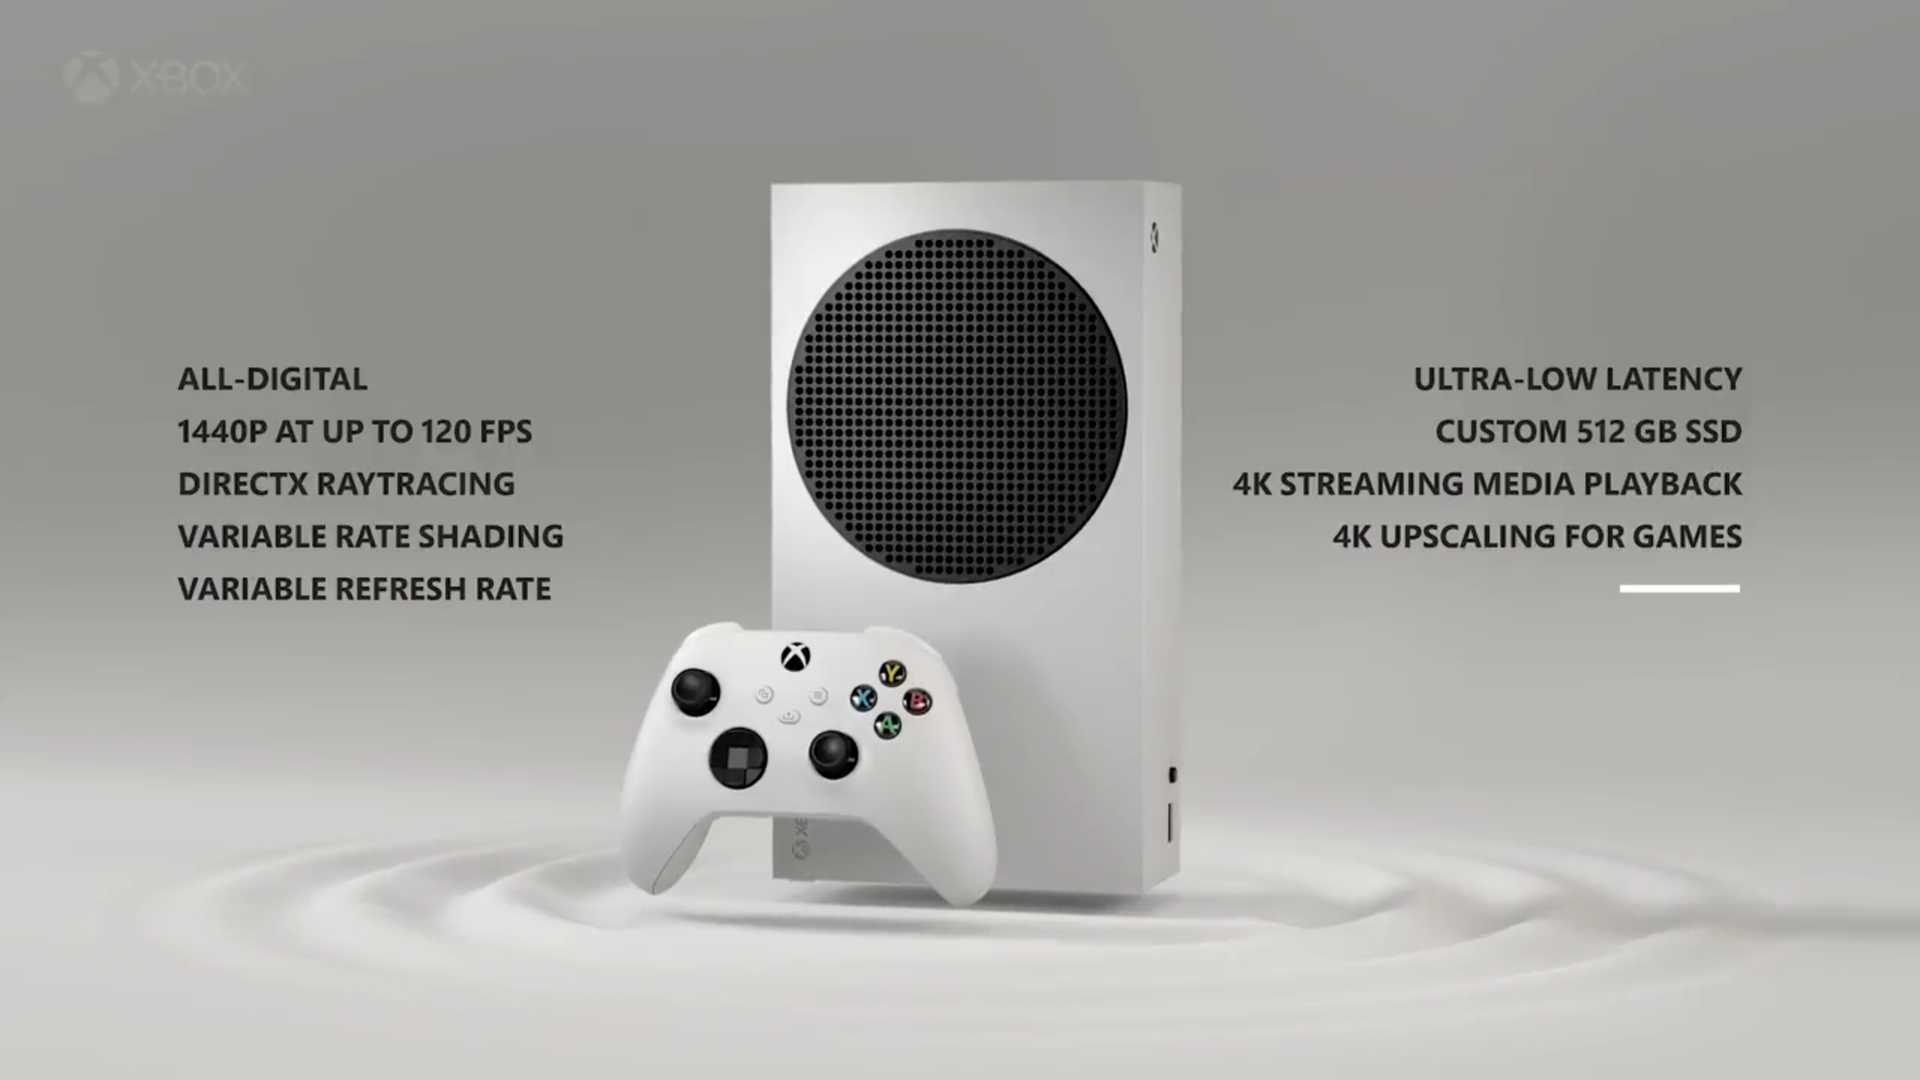 Xbox Series S specs 1440p gaming, high refresh rate, alldigital